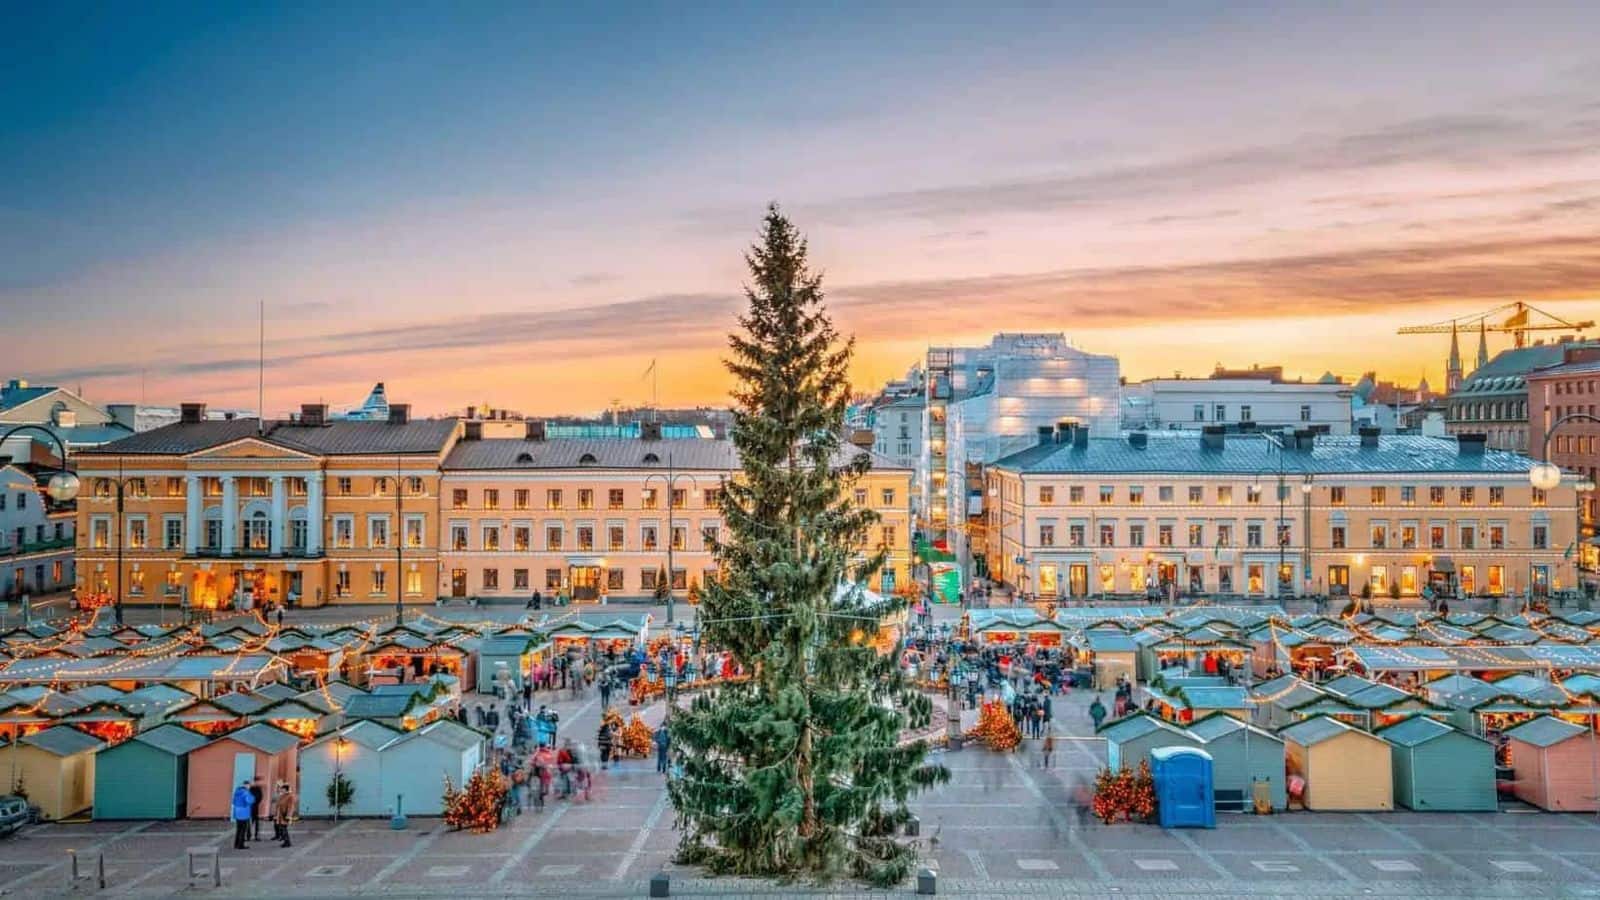 Visiting Helsinki, Finland in winter? Pack these essentials